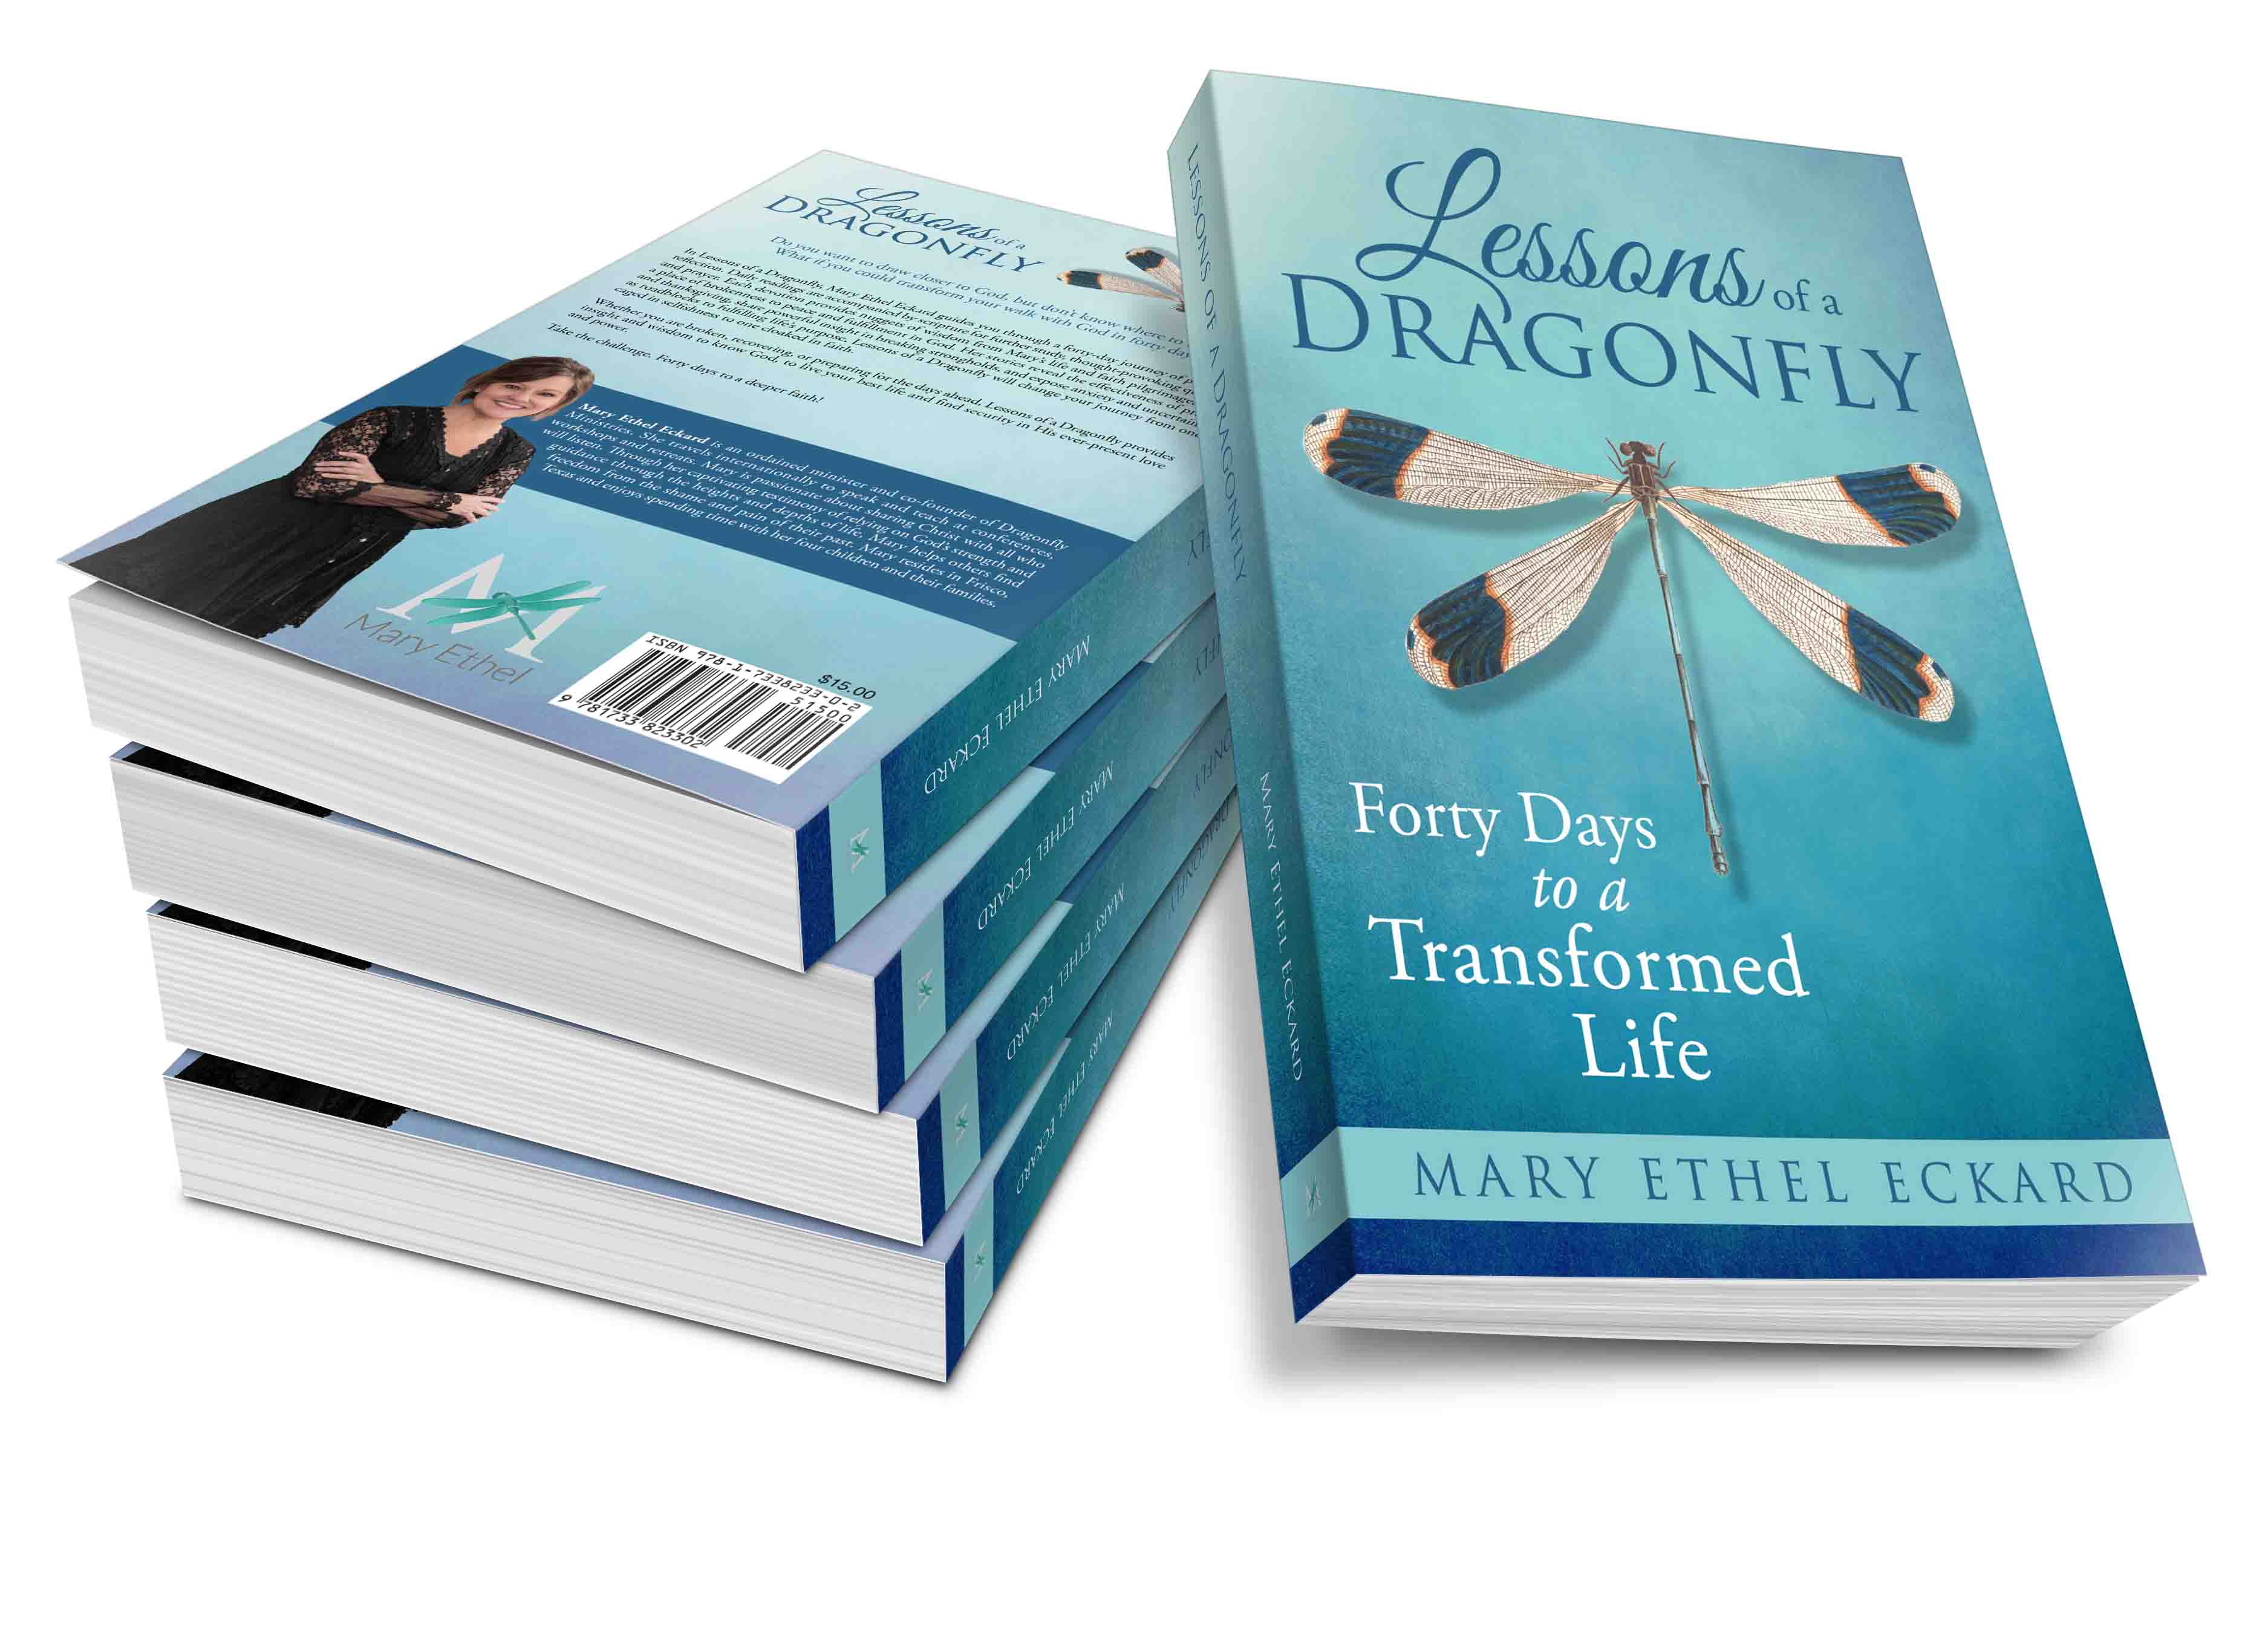 Dragonfly Book Series